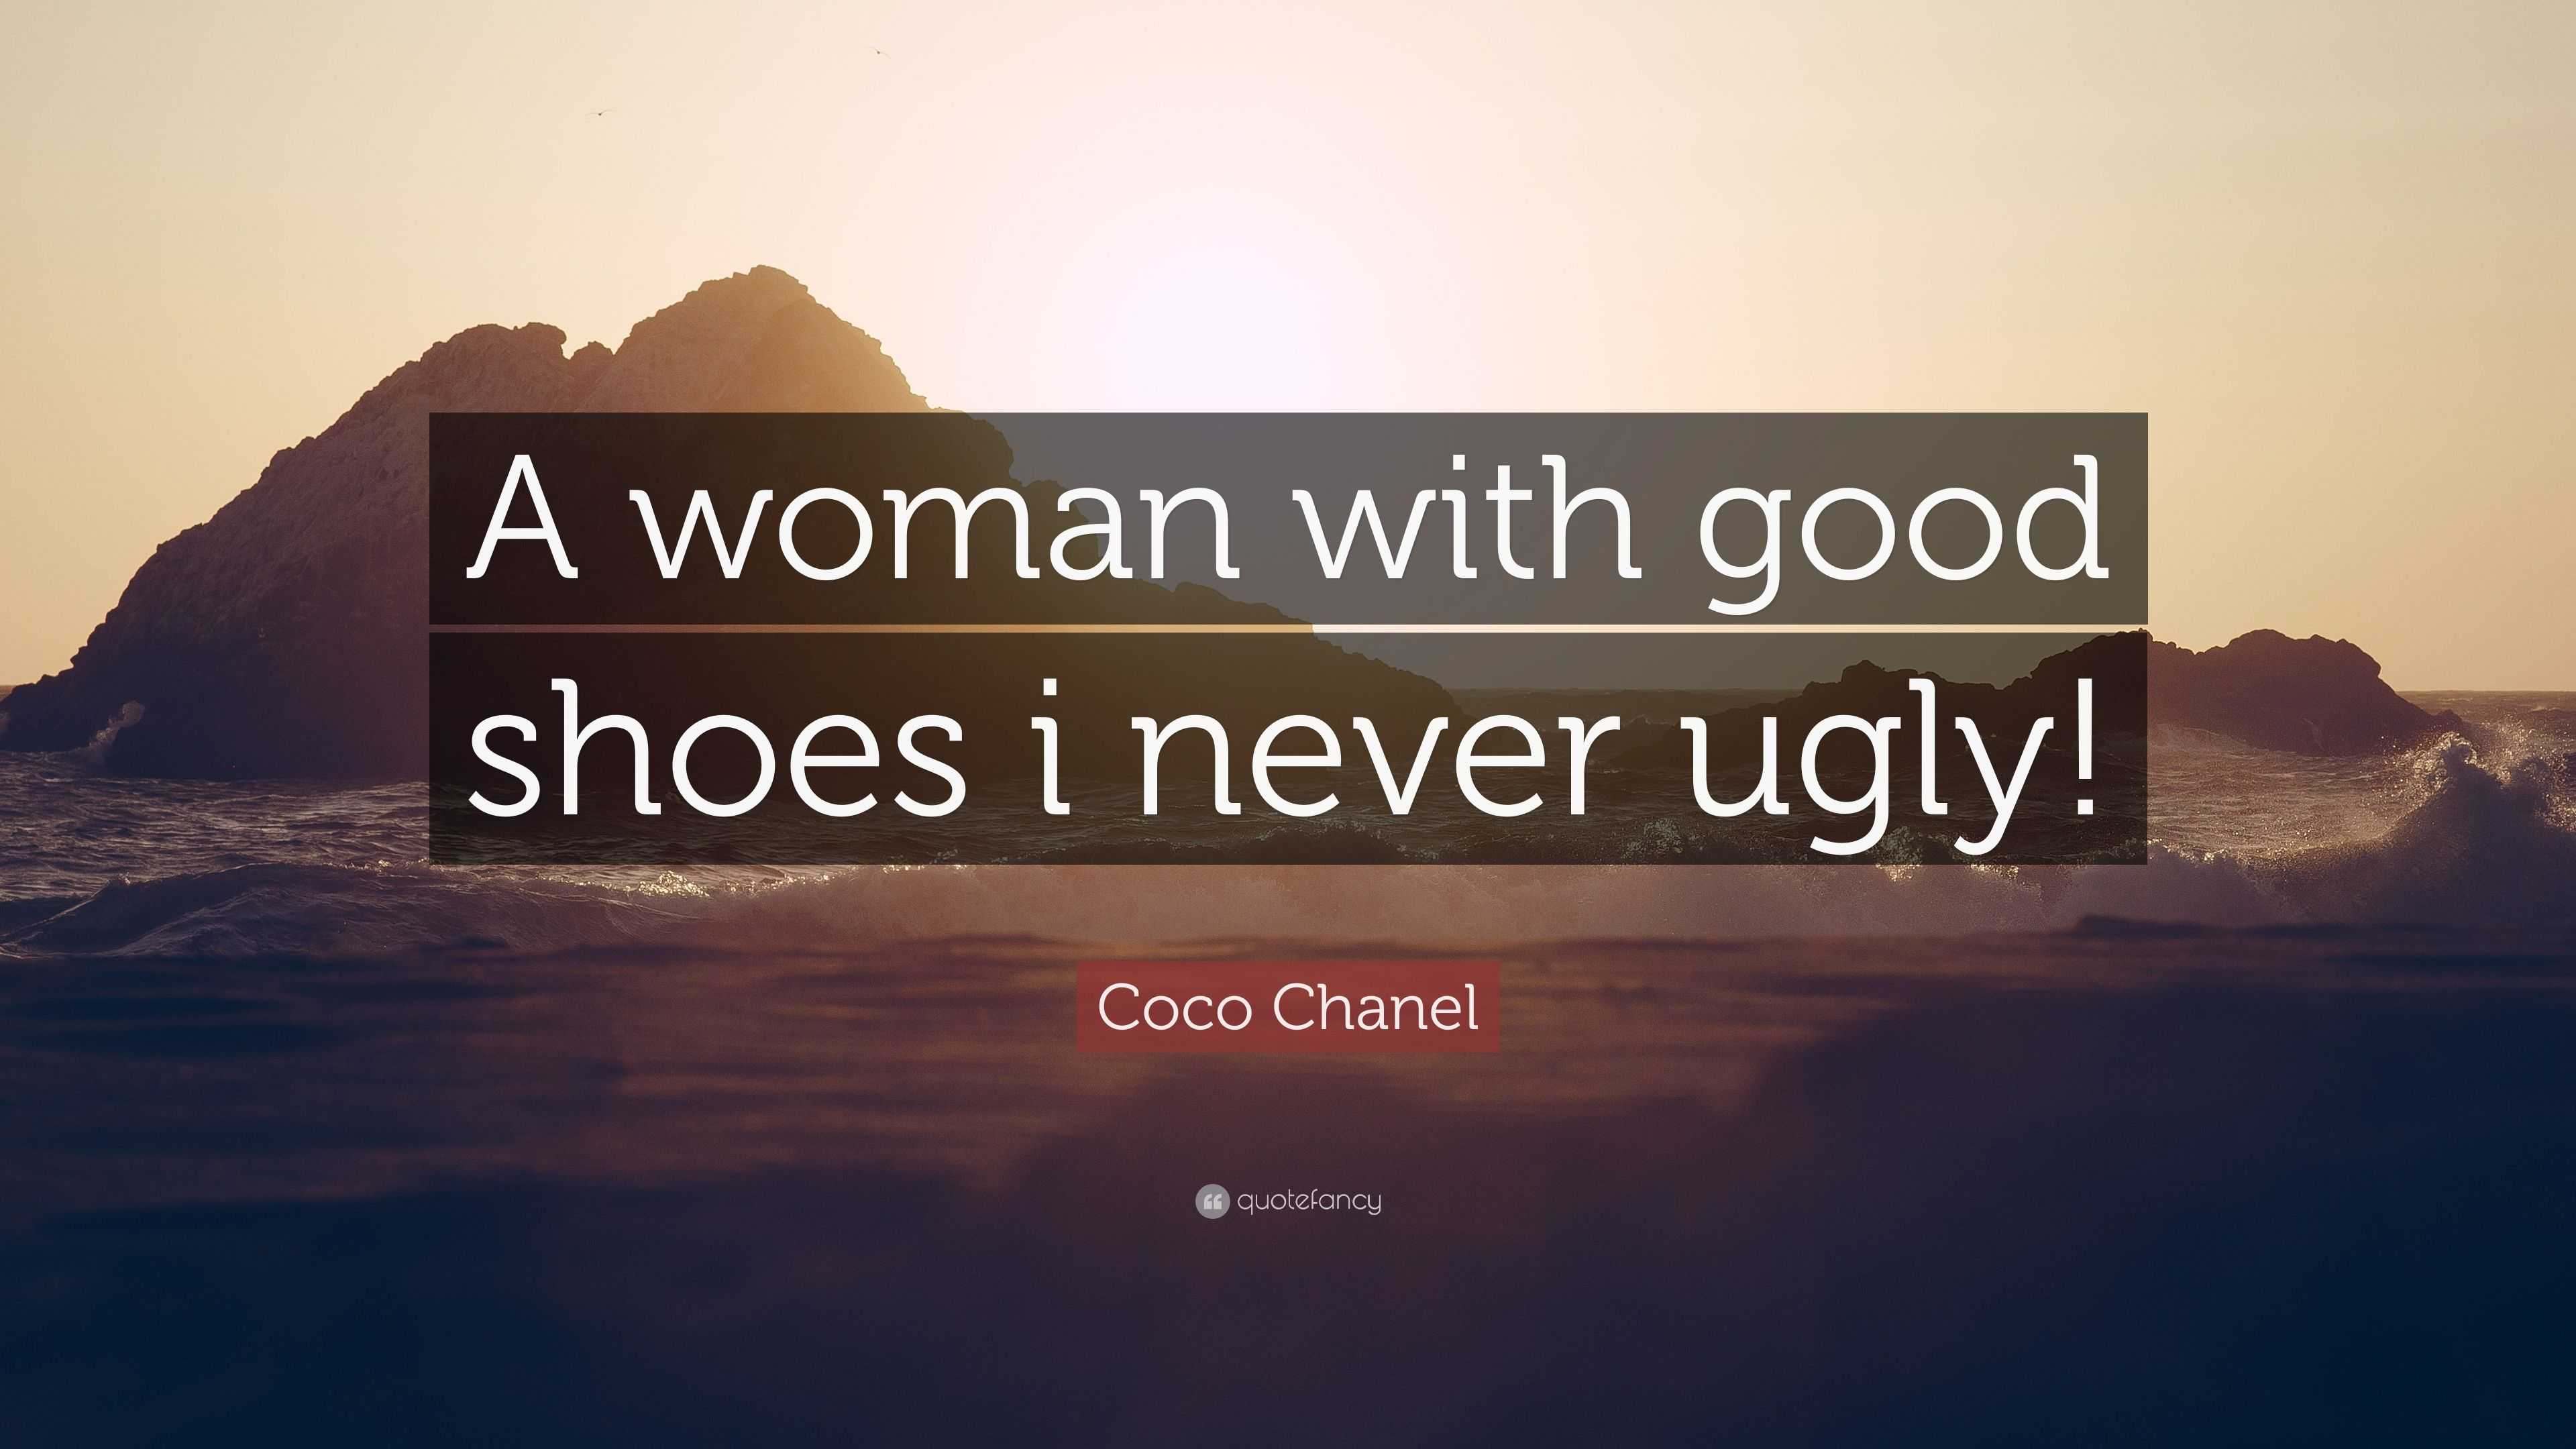 Coco Chanel Quote: “A woman with good shoes i never ugly!”